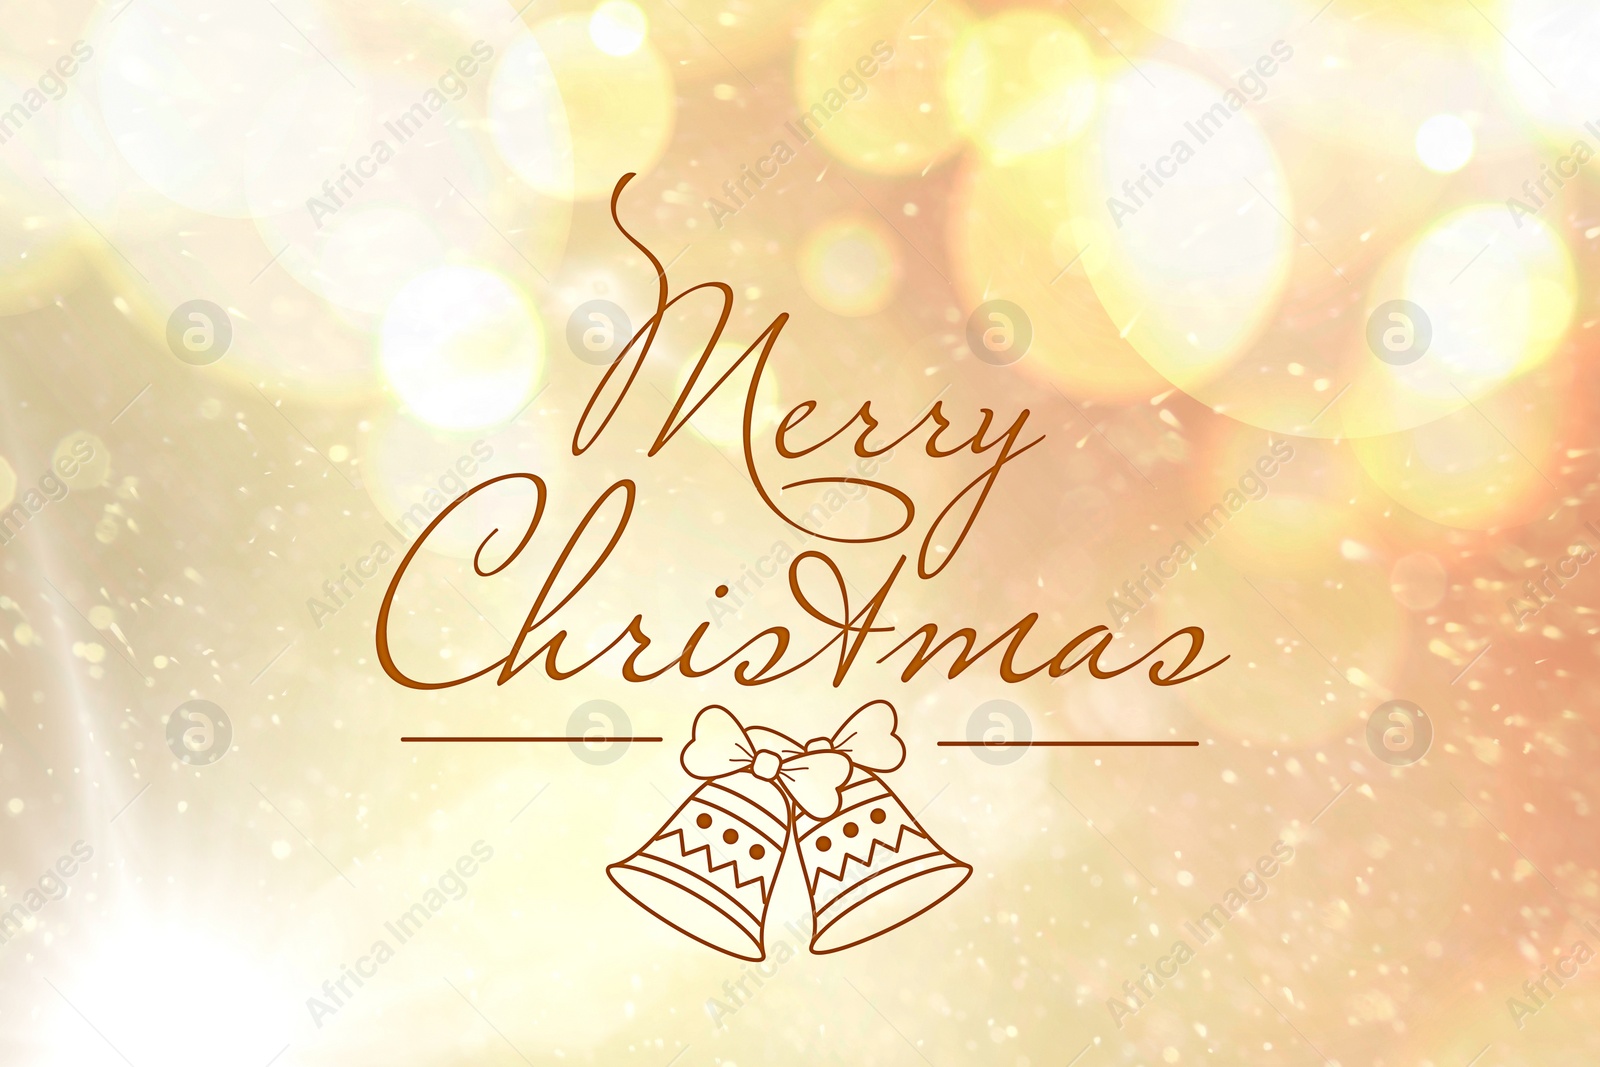 Image of Text Merry Christmas on blurred background with golden lights. Bokeh effect